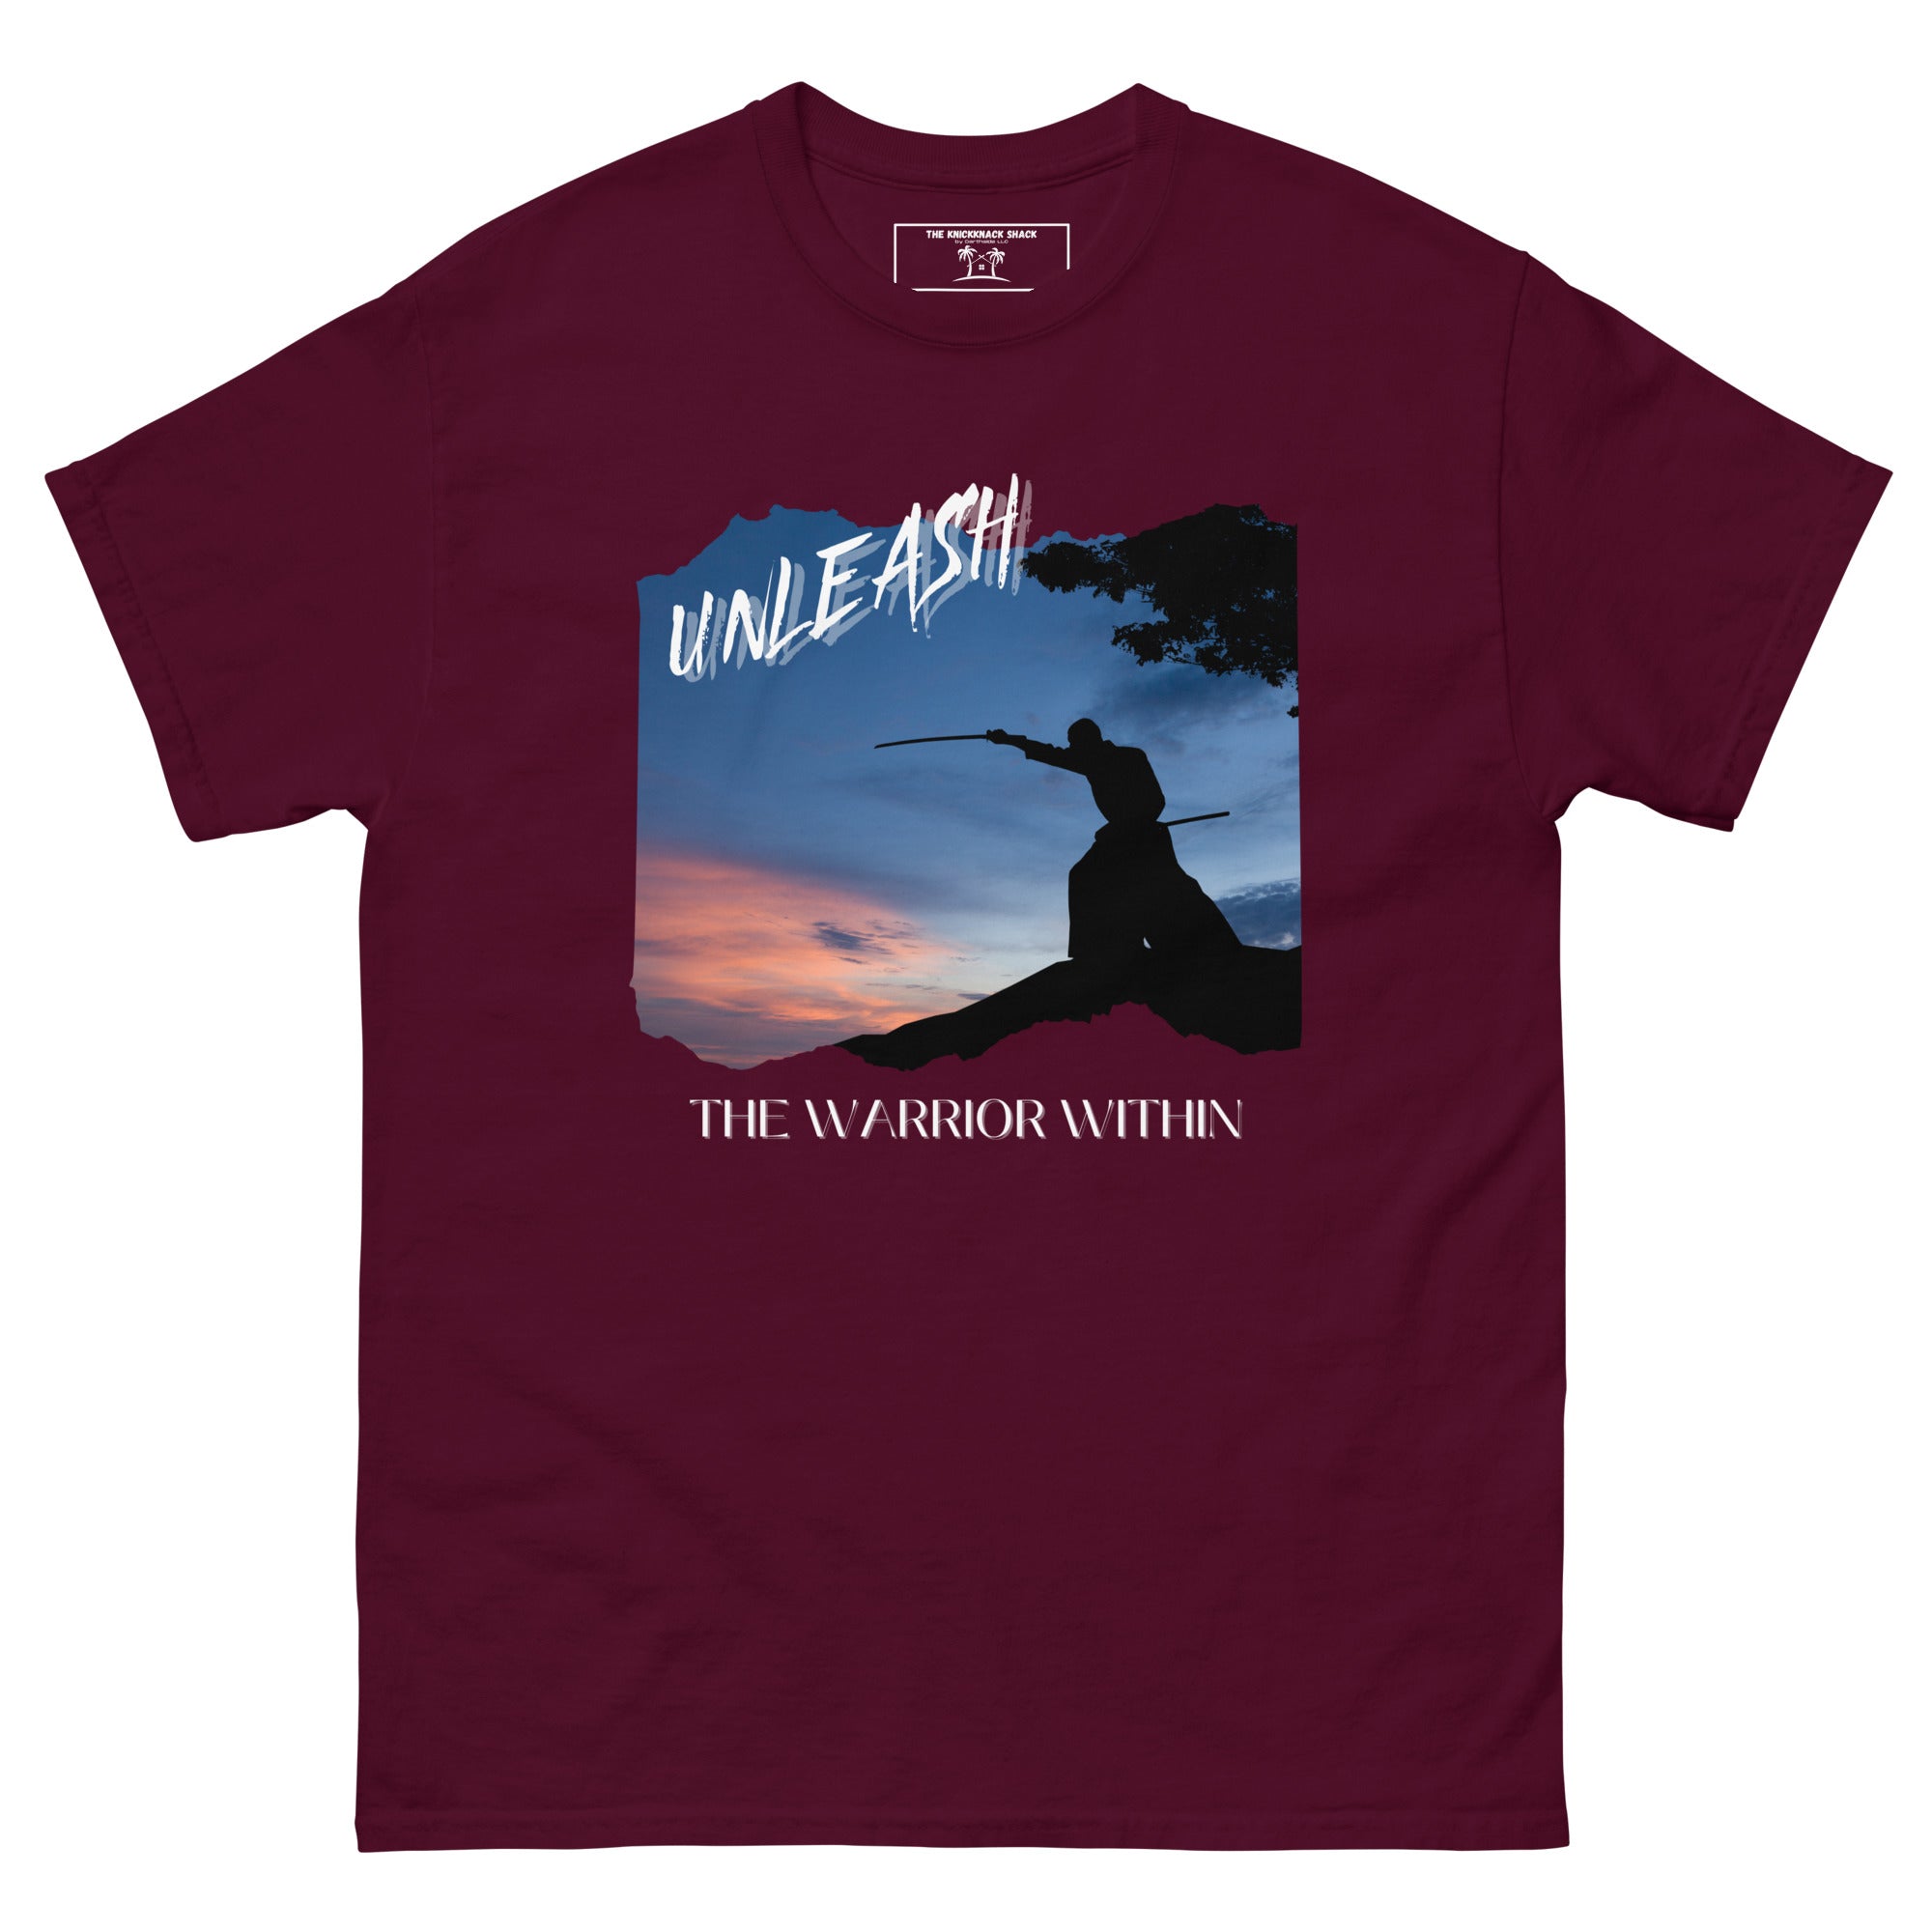 Tee-shirt classique - Warrior Within 2 (couleurs sombres)